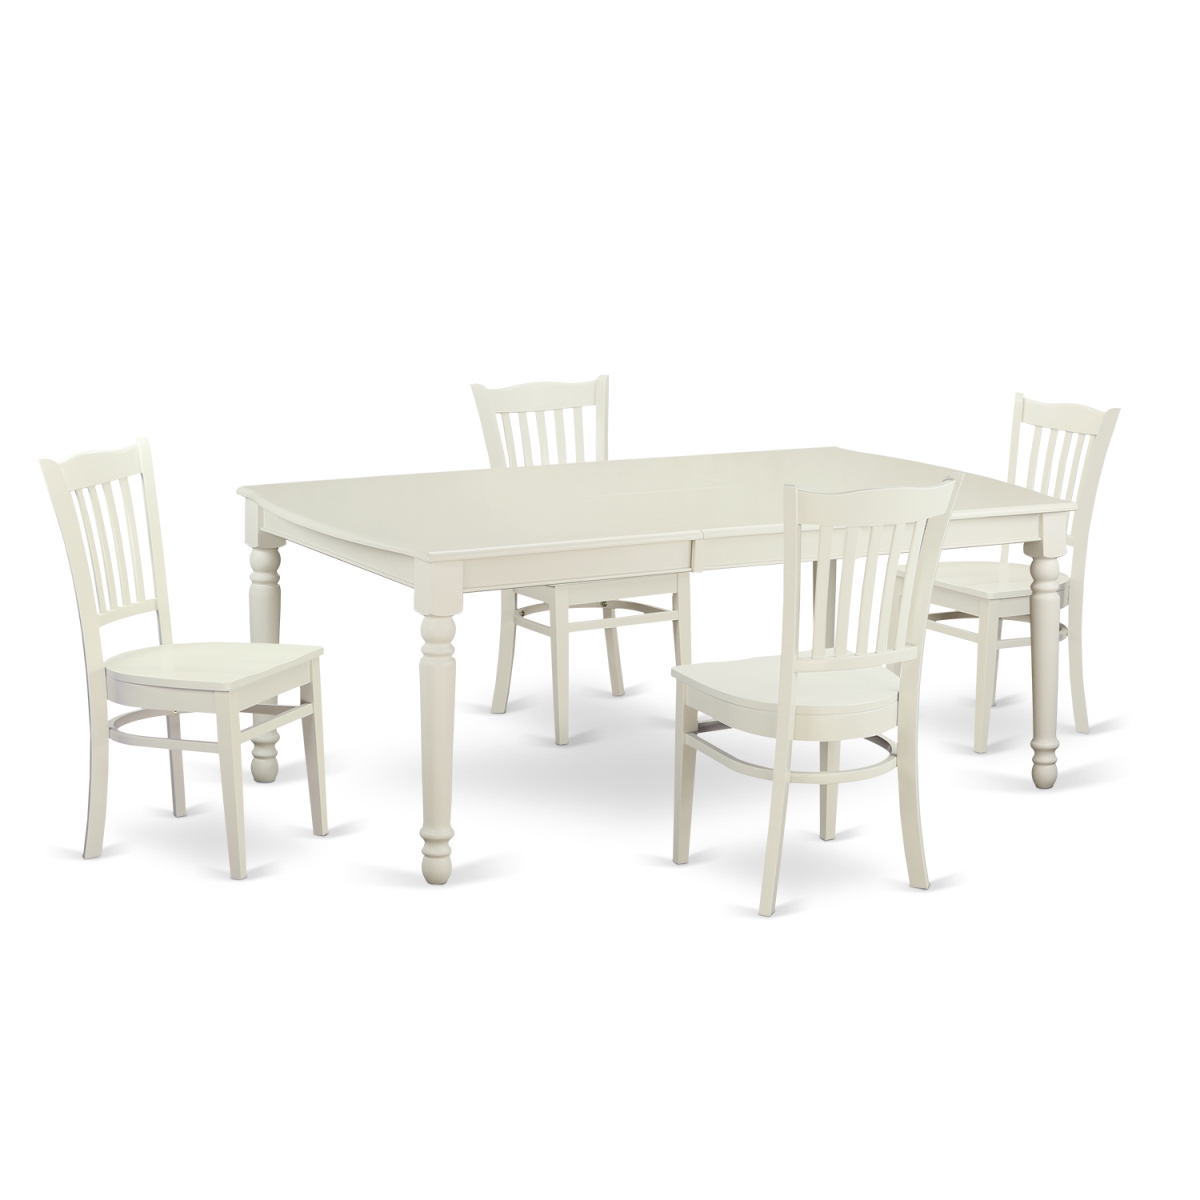 Picture of East West Furniture DOGR5-LWH-W Small Kitchen Table Set with 4 Dining Table & 4 Chairs, Linen White - 5 Piece